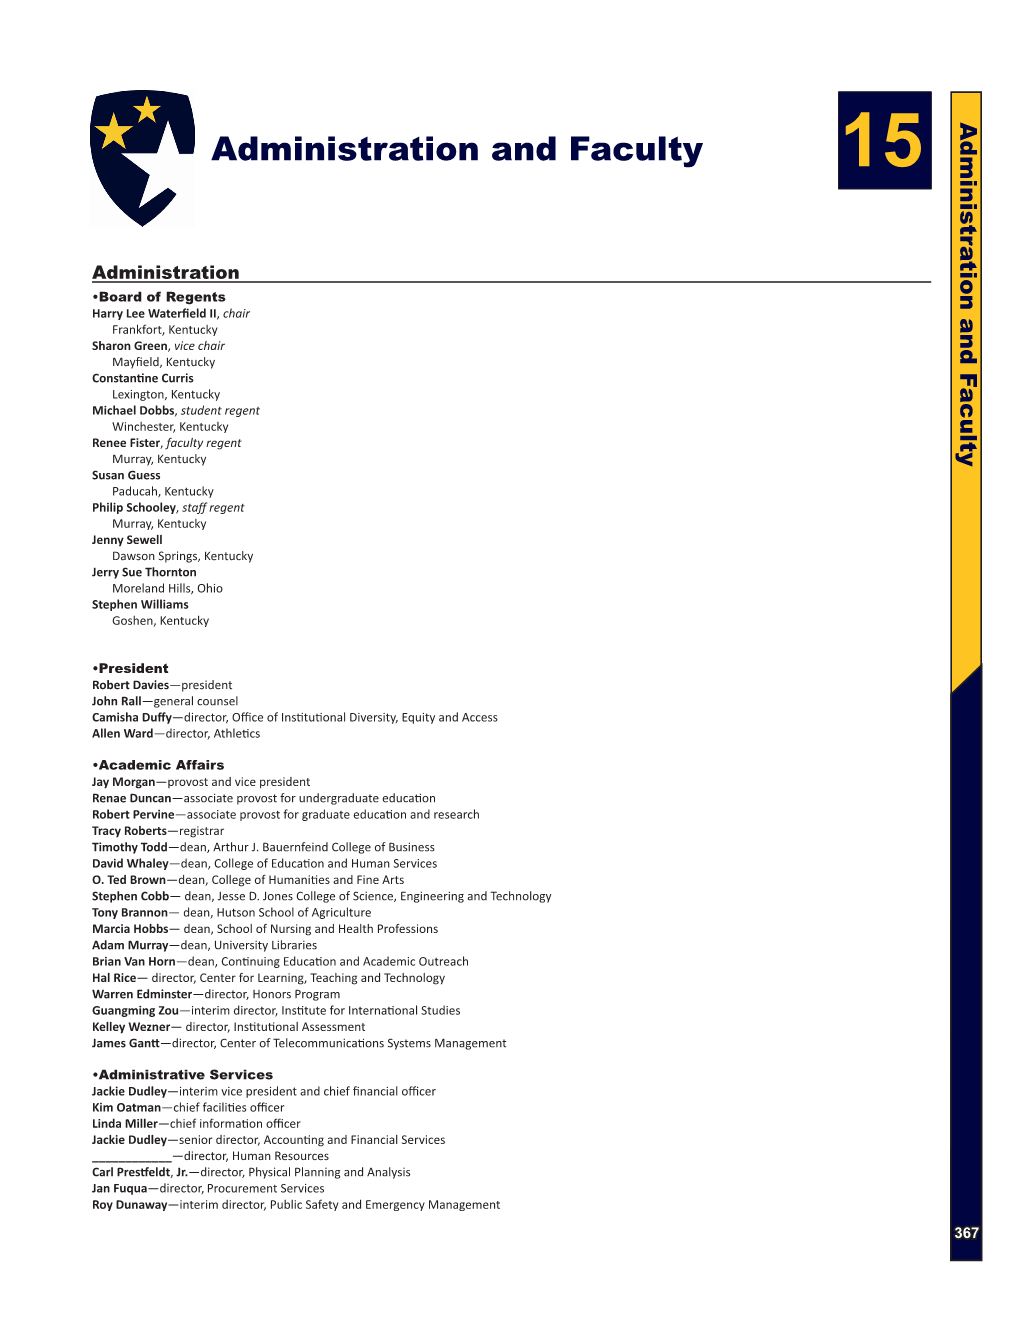 Administration and Faculty